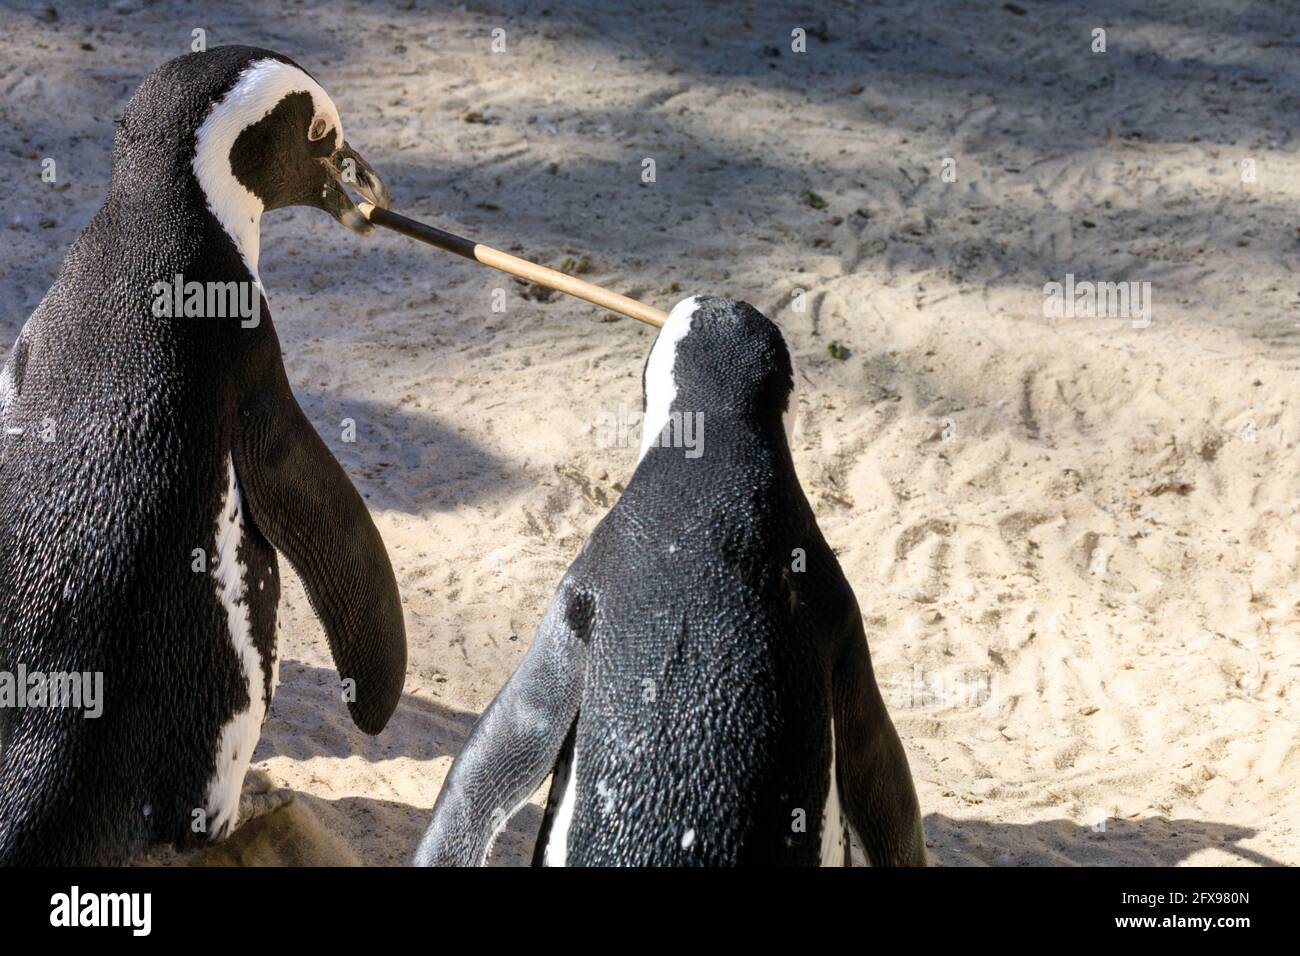 Two African penguins (Spheniscus demersus), also known as the Cape penguin, carry a twig together Stock Photo